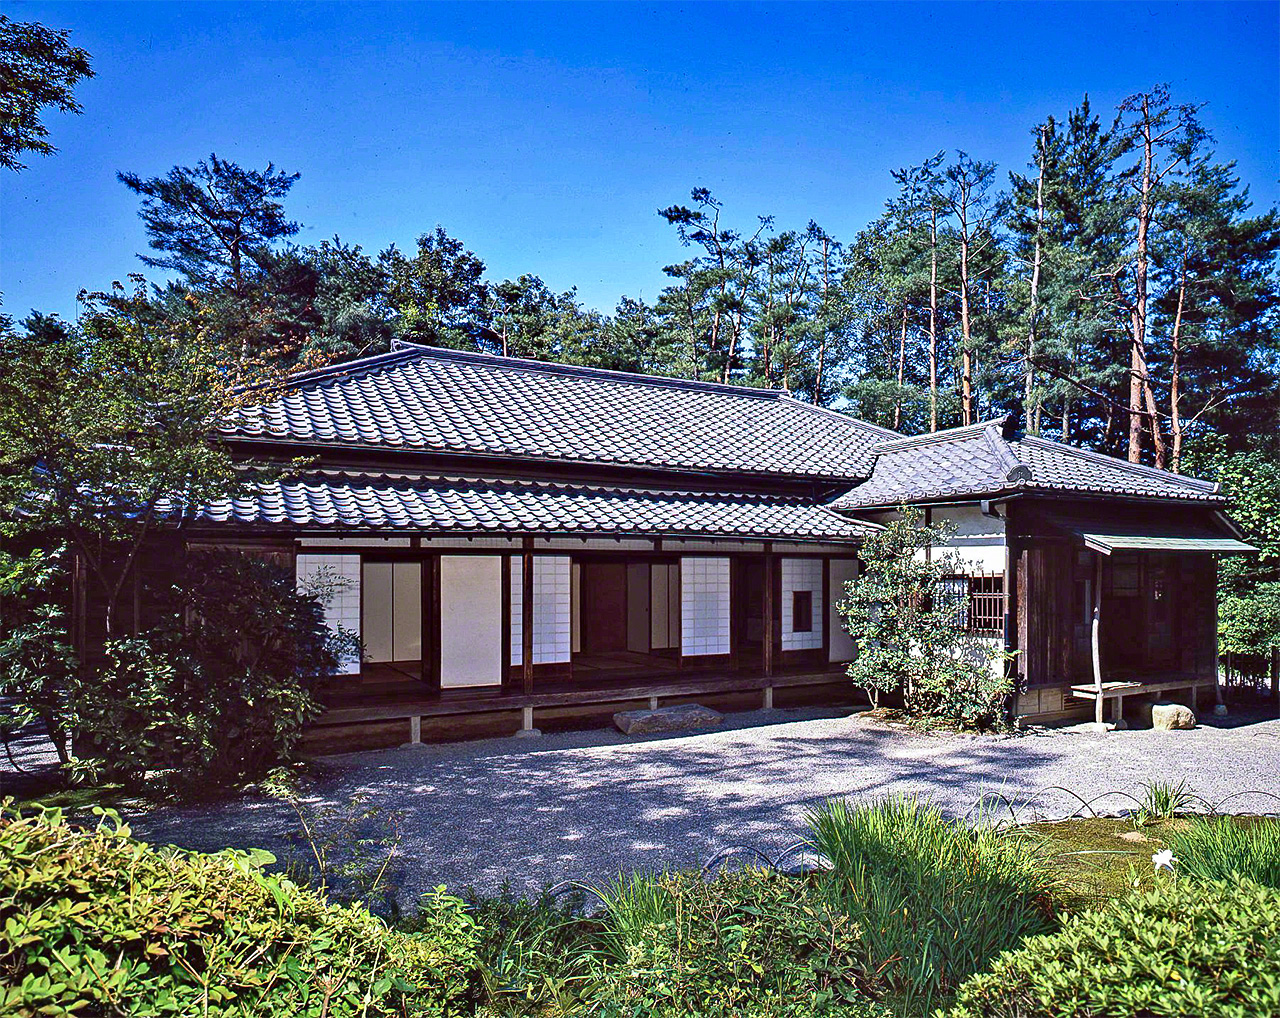 The residence where Mori Ōgai and Natsume Sōseki lived, built in 1887 in Tokyo.